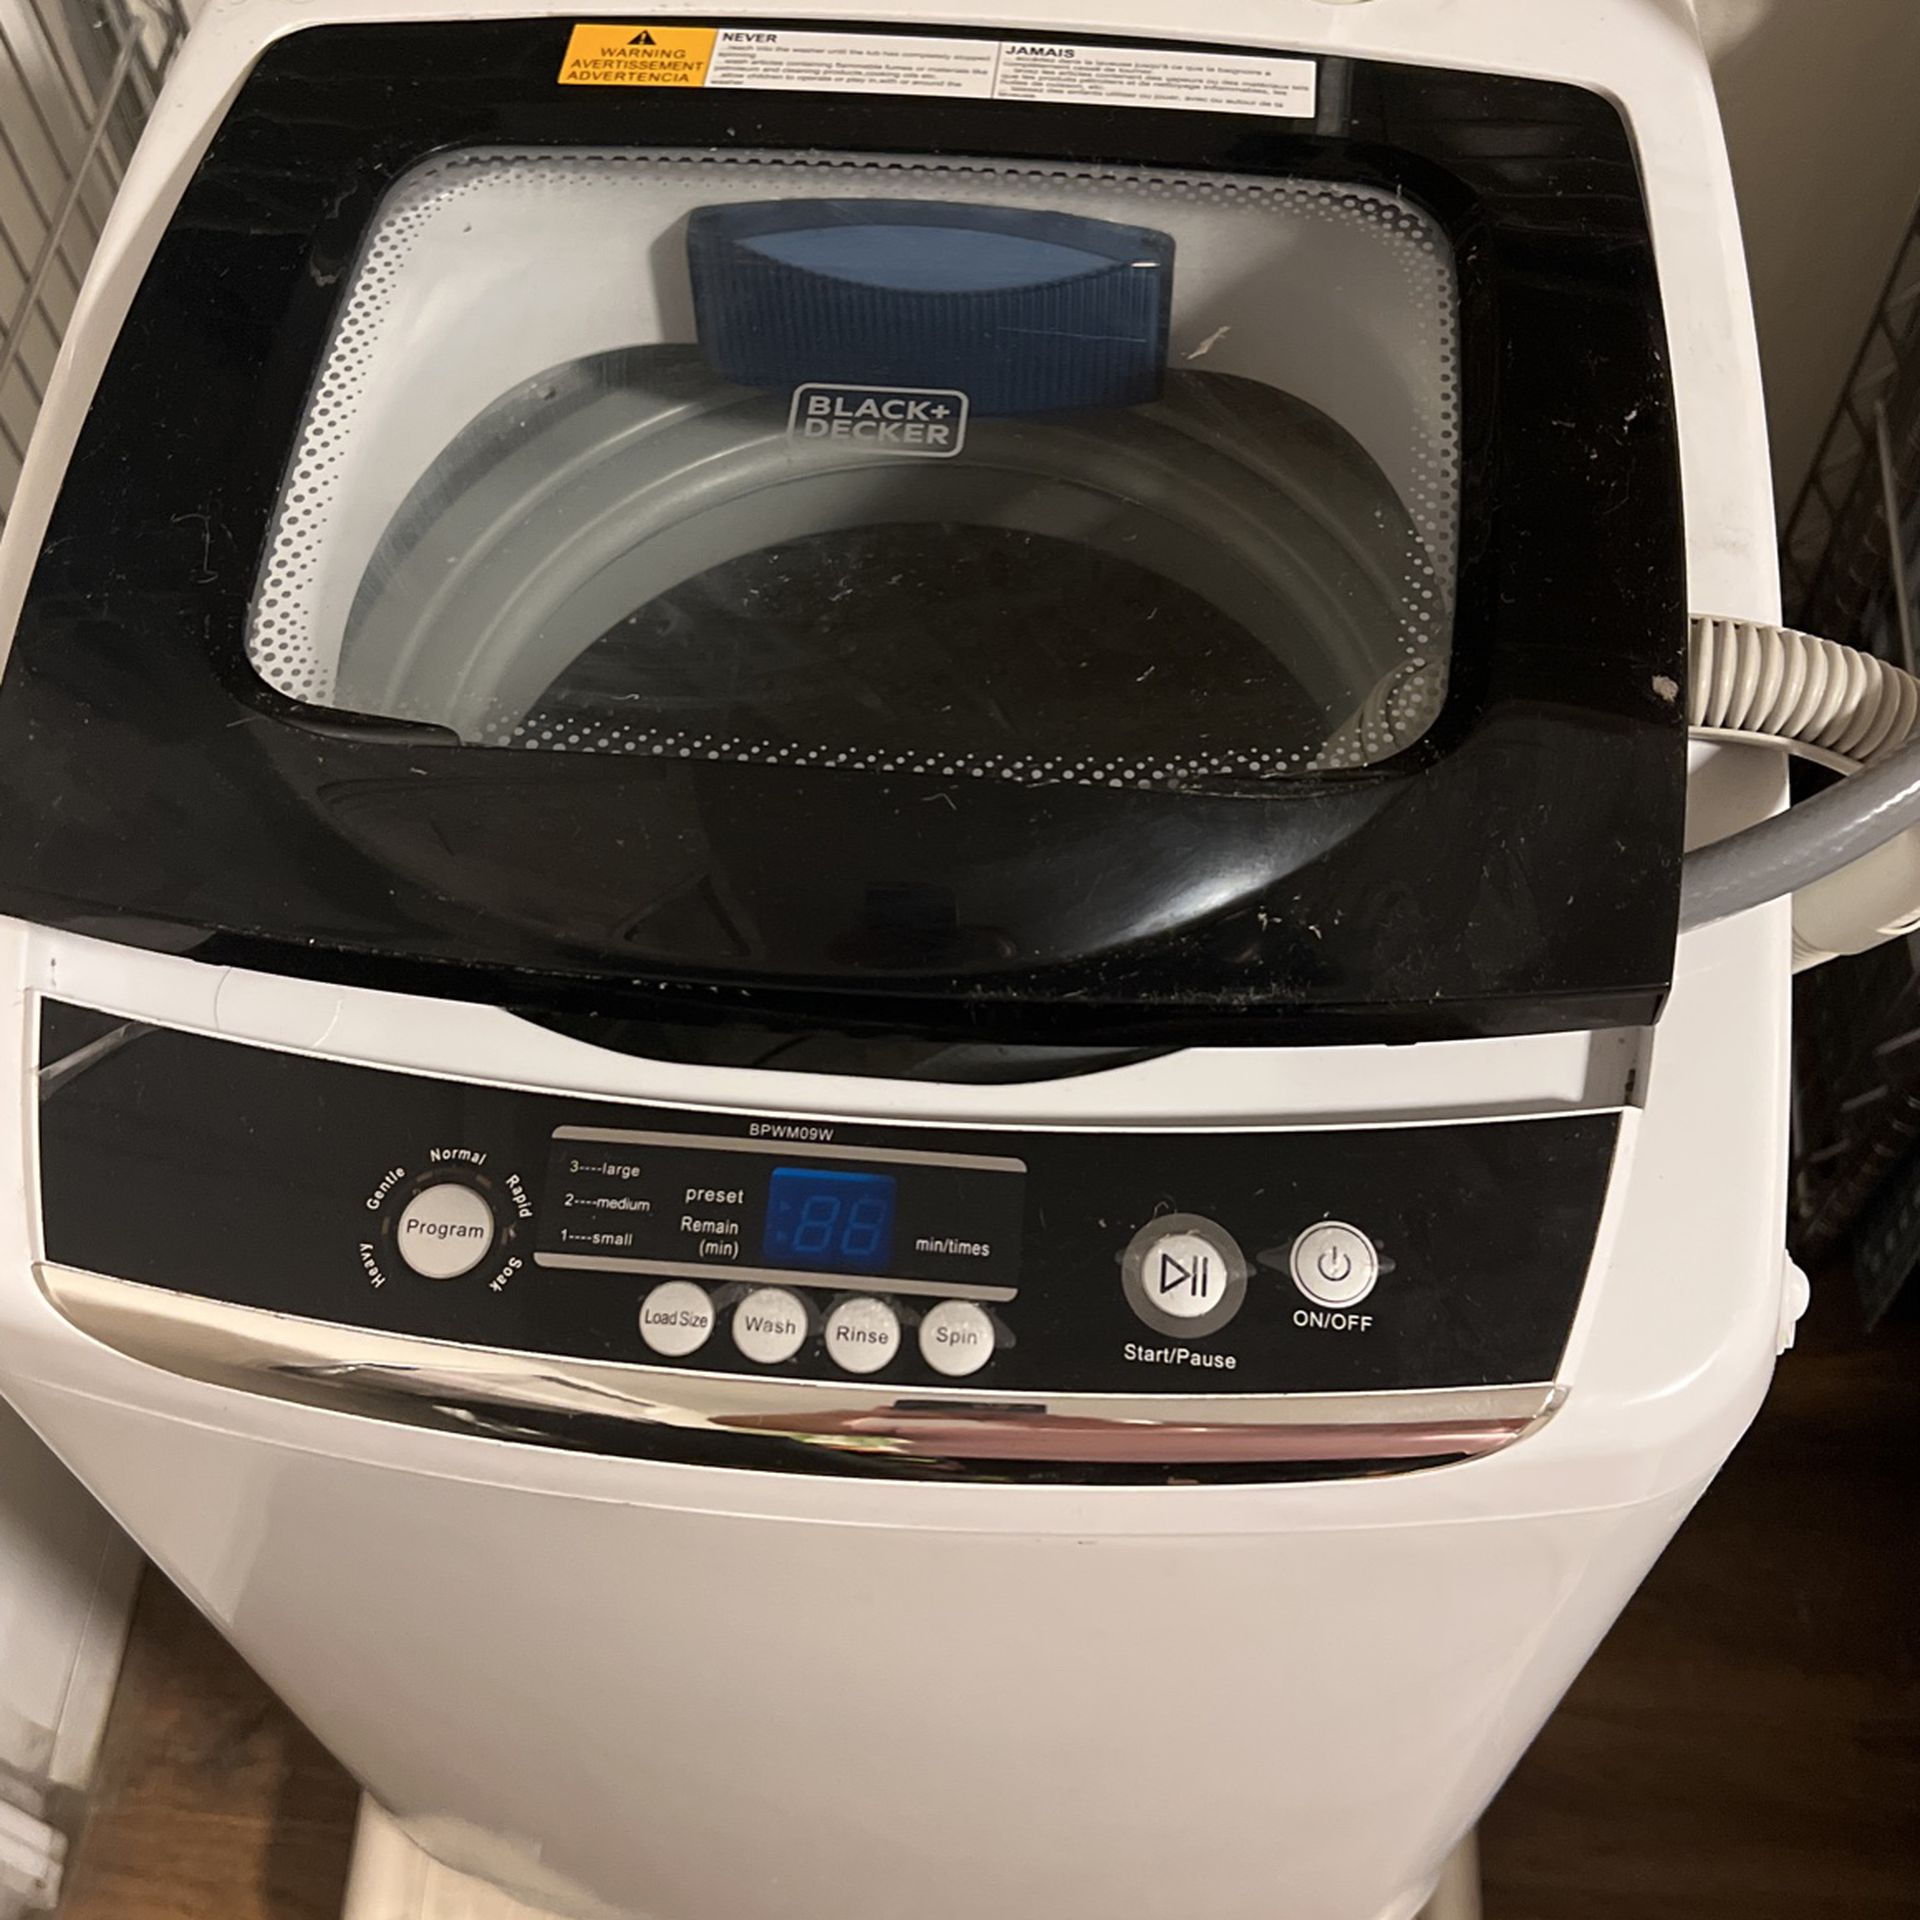 Portable Washer & Dryer for Sale in Pico Rivera, CA - OfferUp